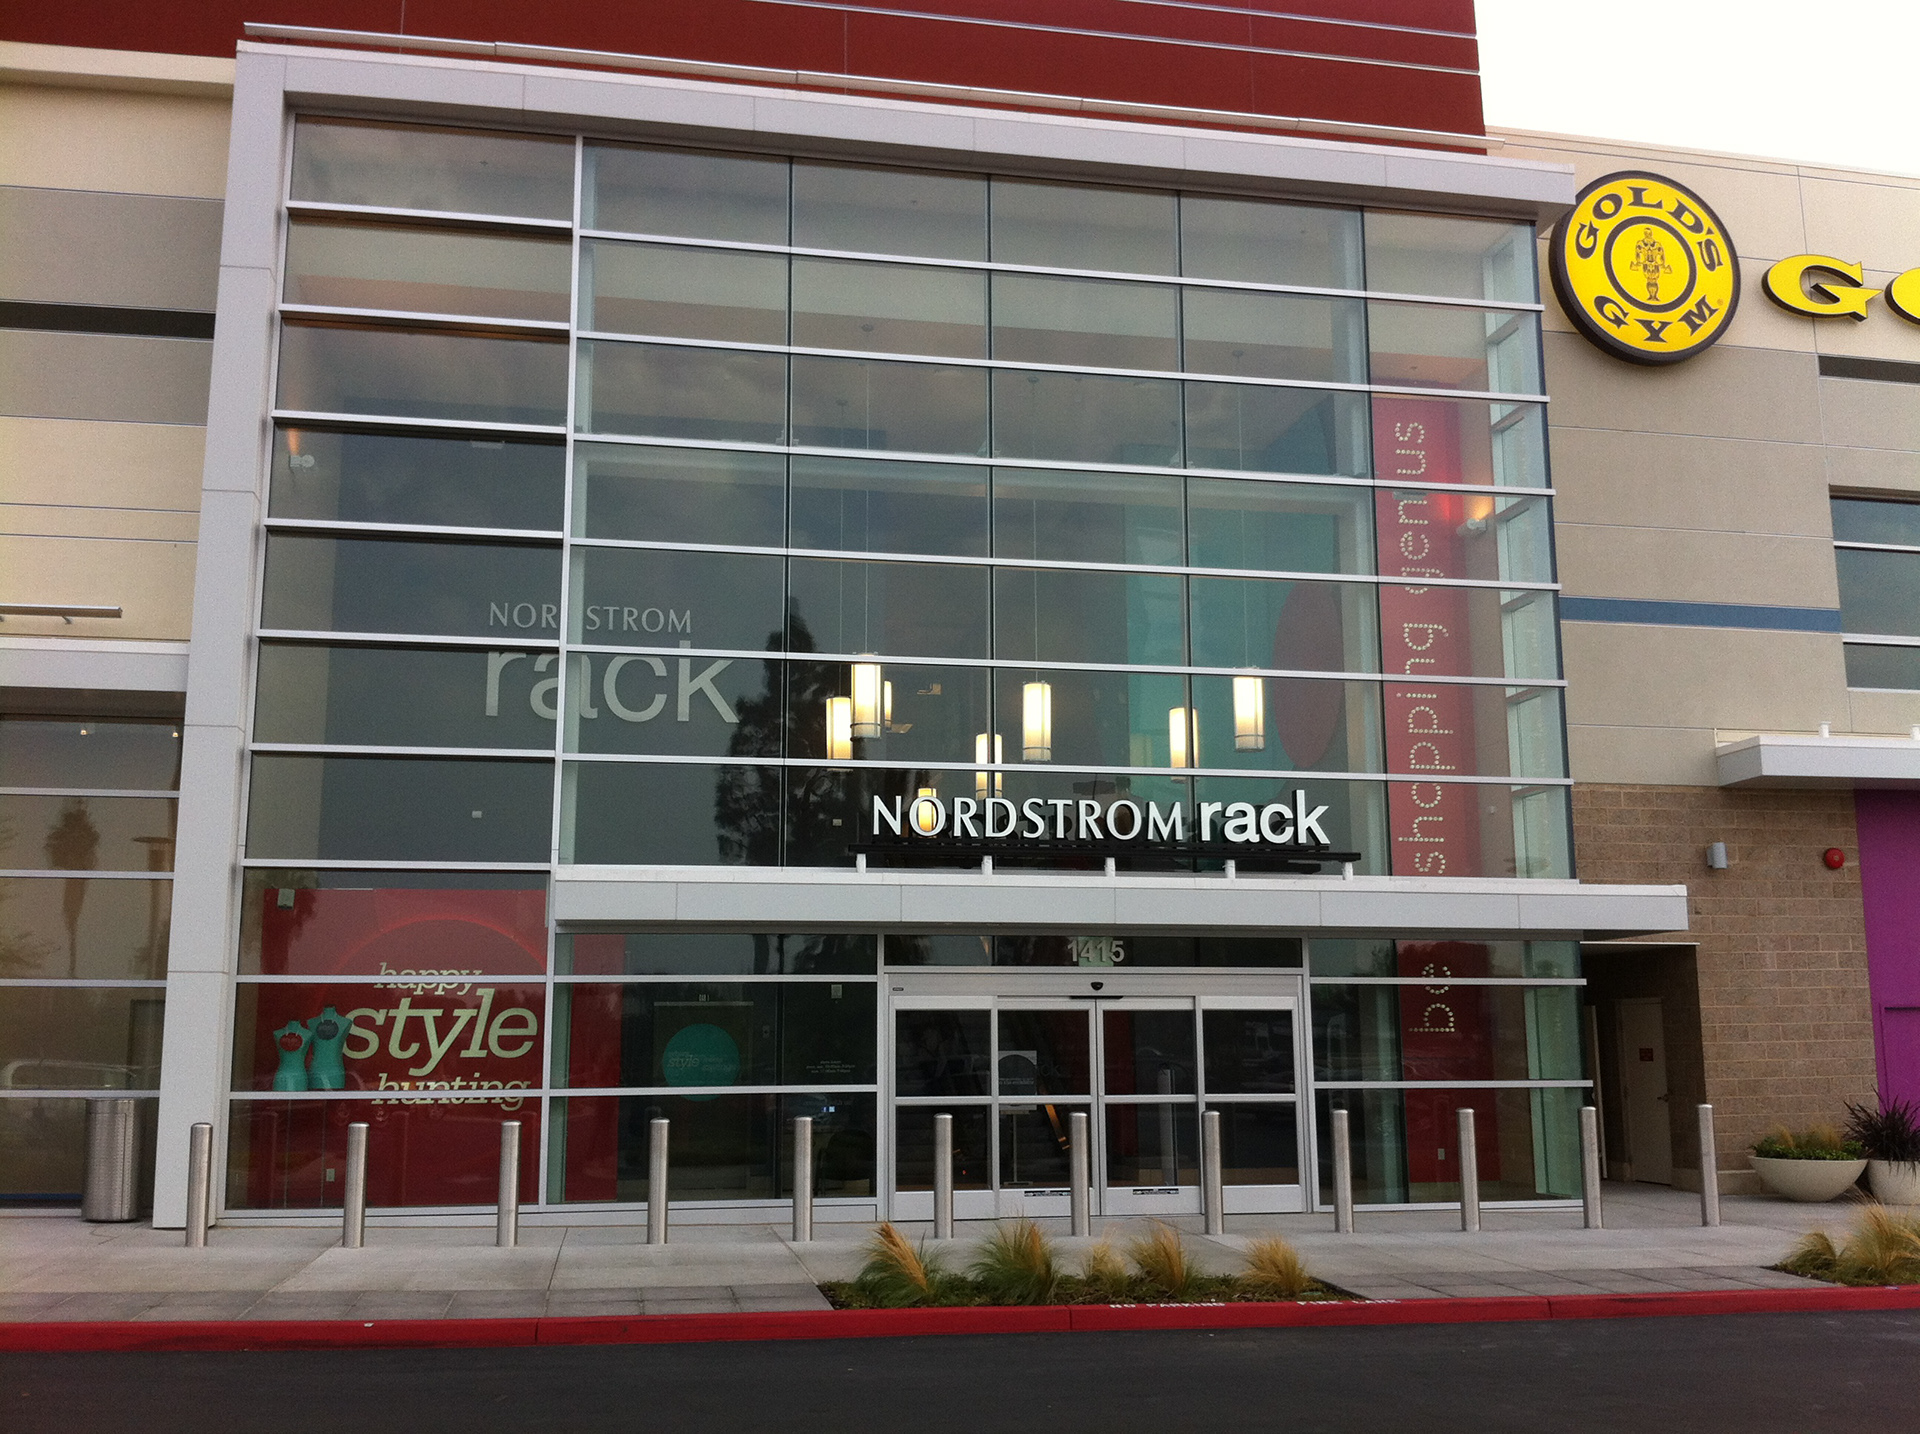 Nordstrom Rack to open location in Best of the West shopping